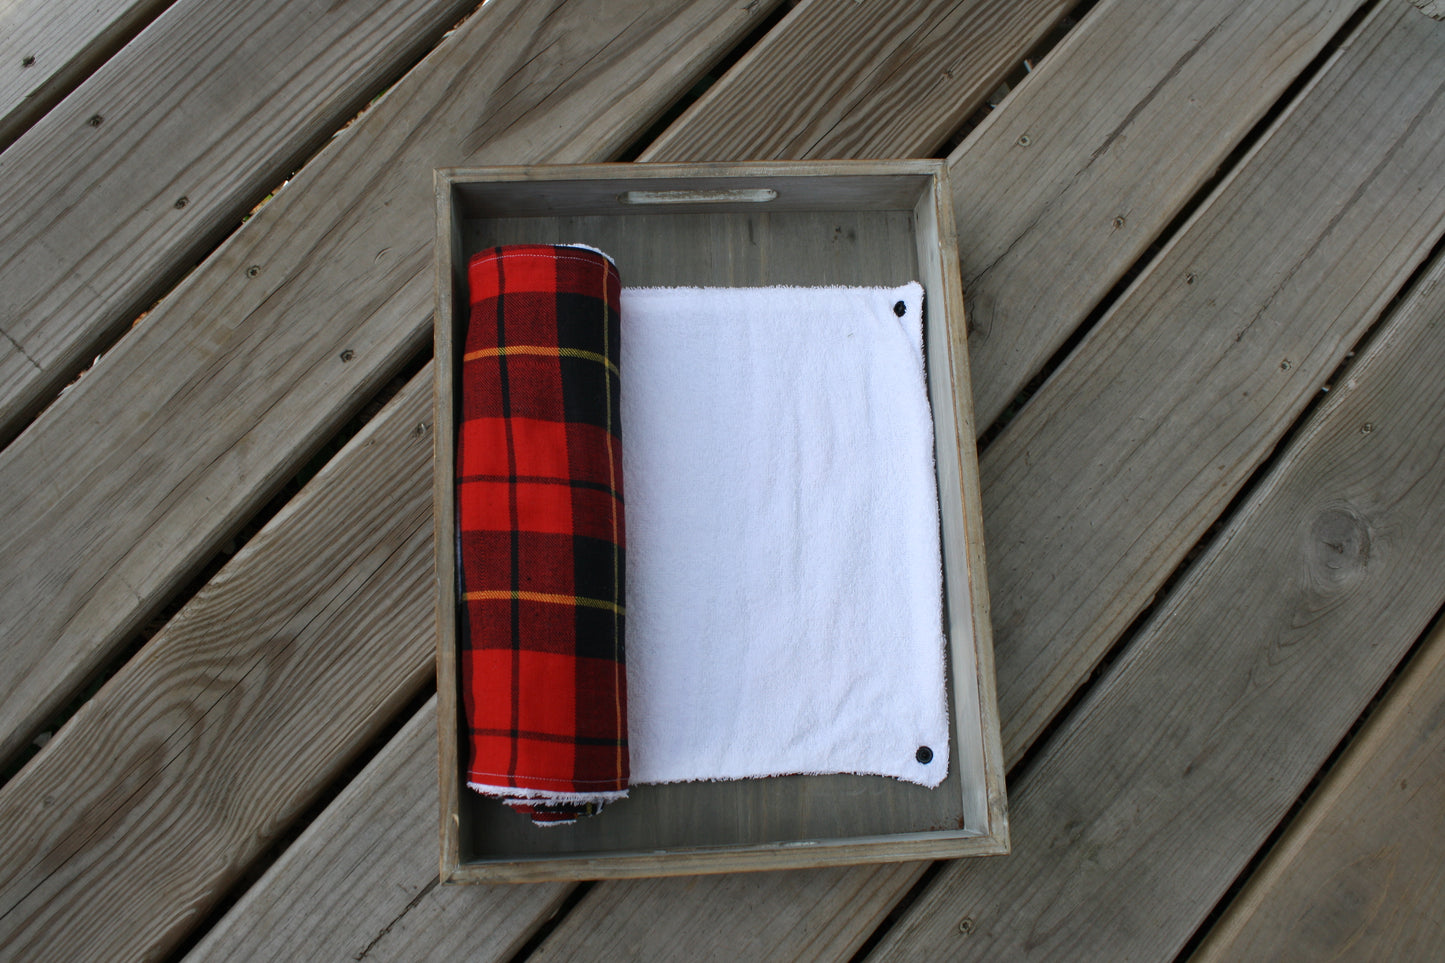 red and black plaid snap together towel set